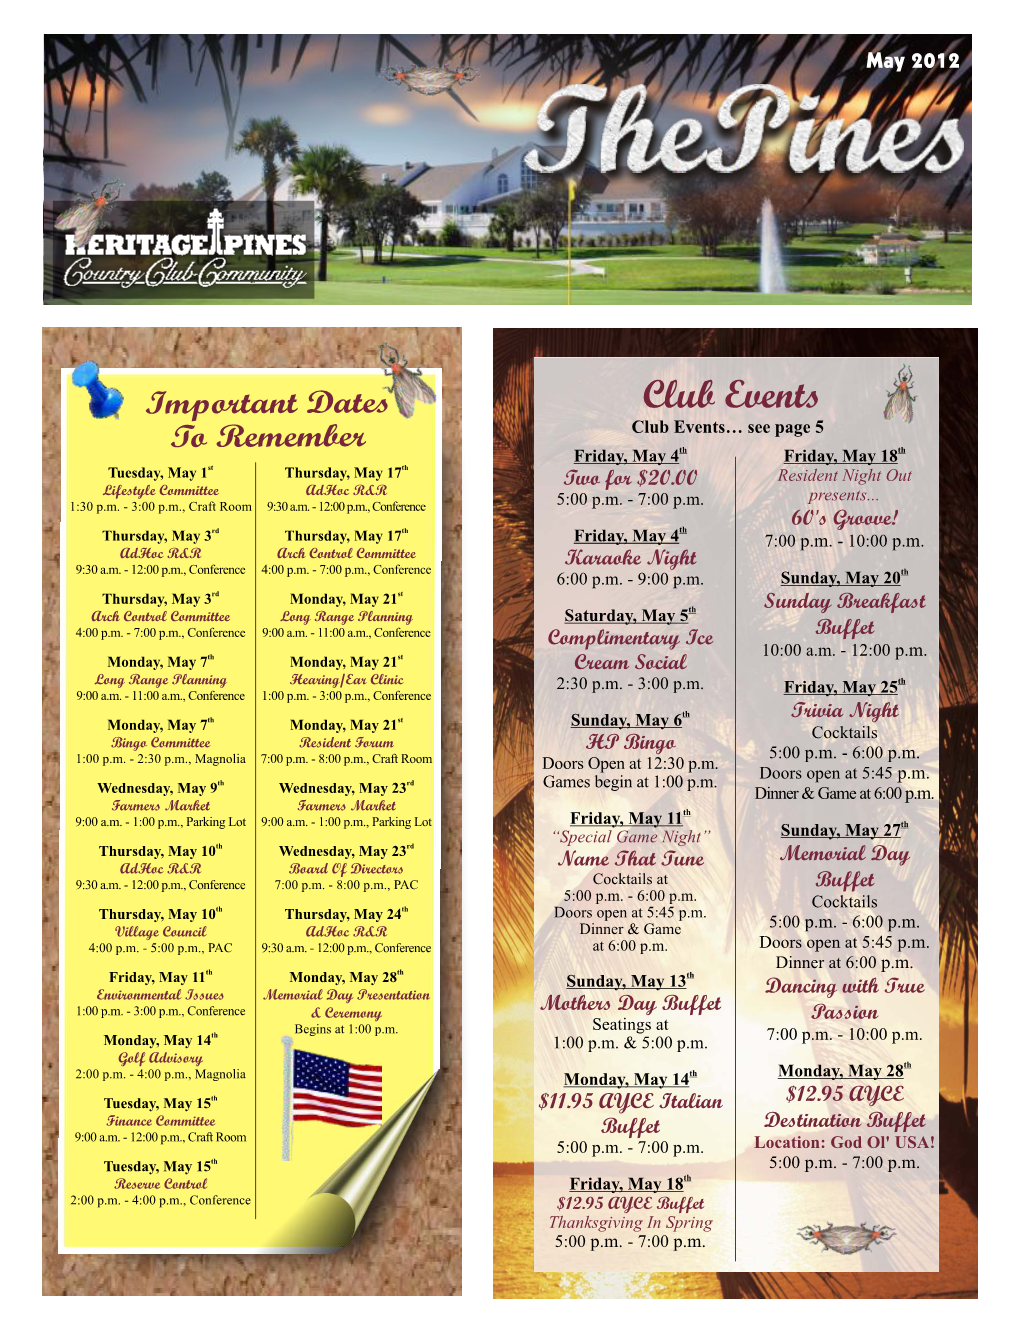 Heritage Pines Newsletter 2012 May.Cdr